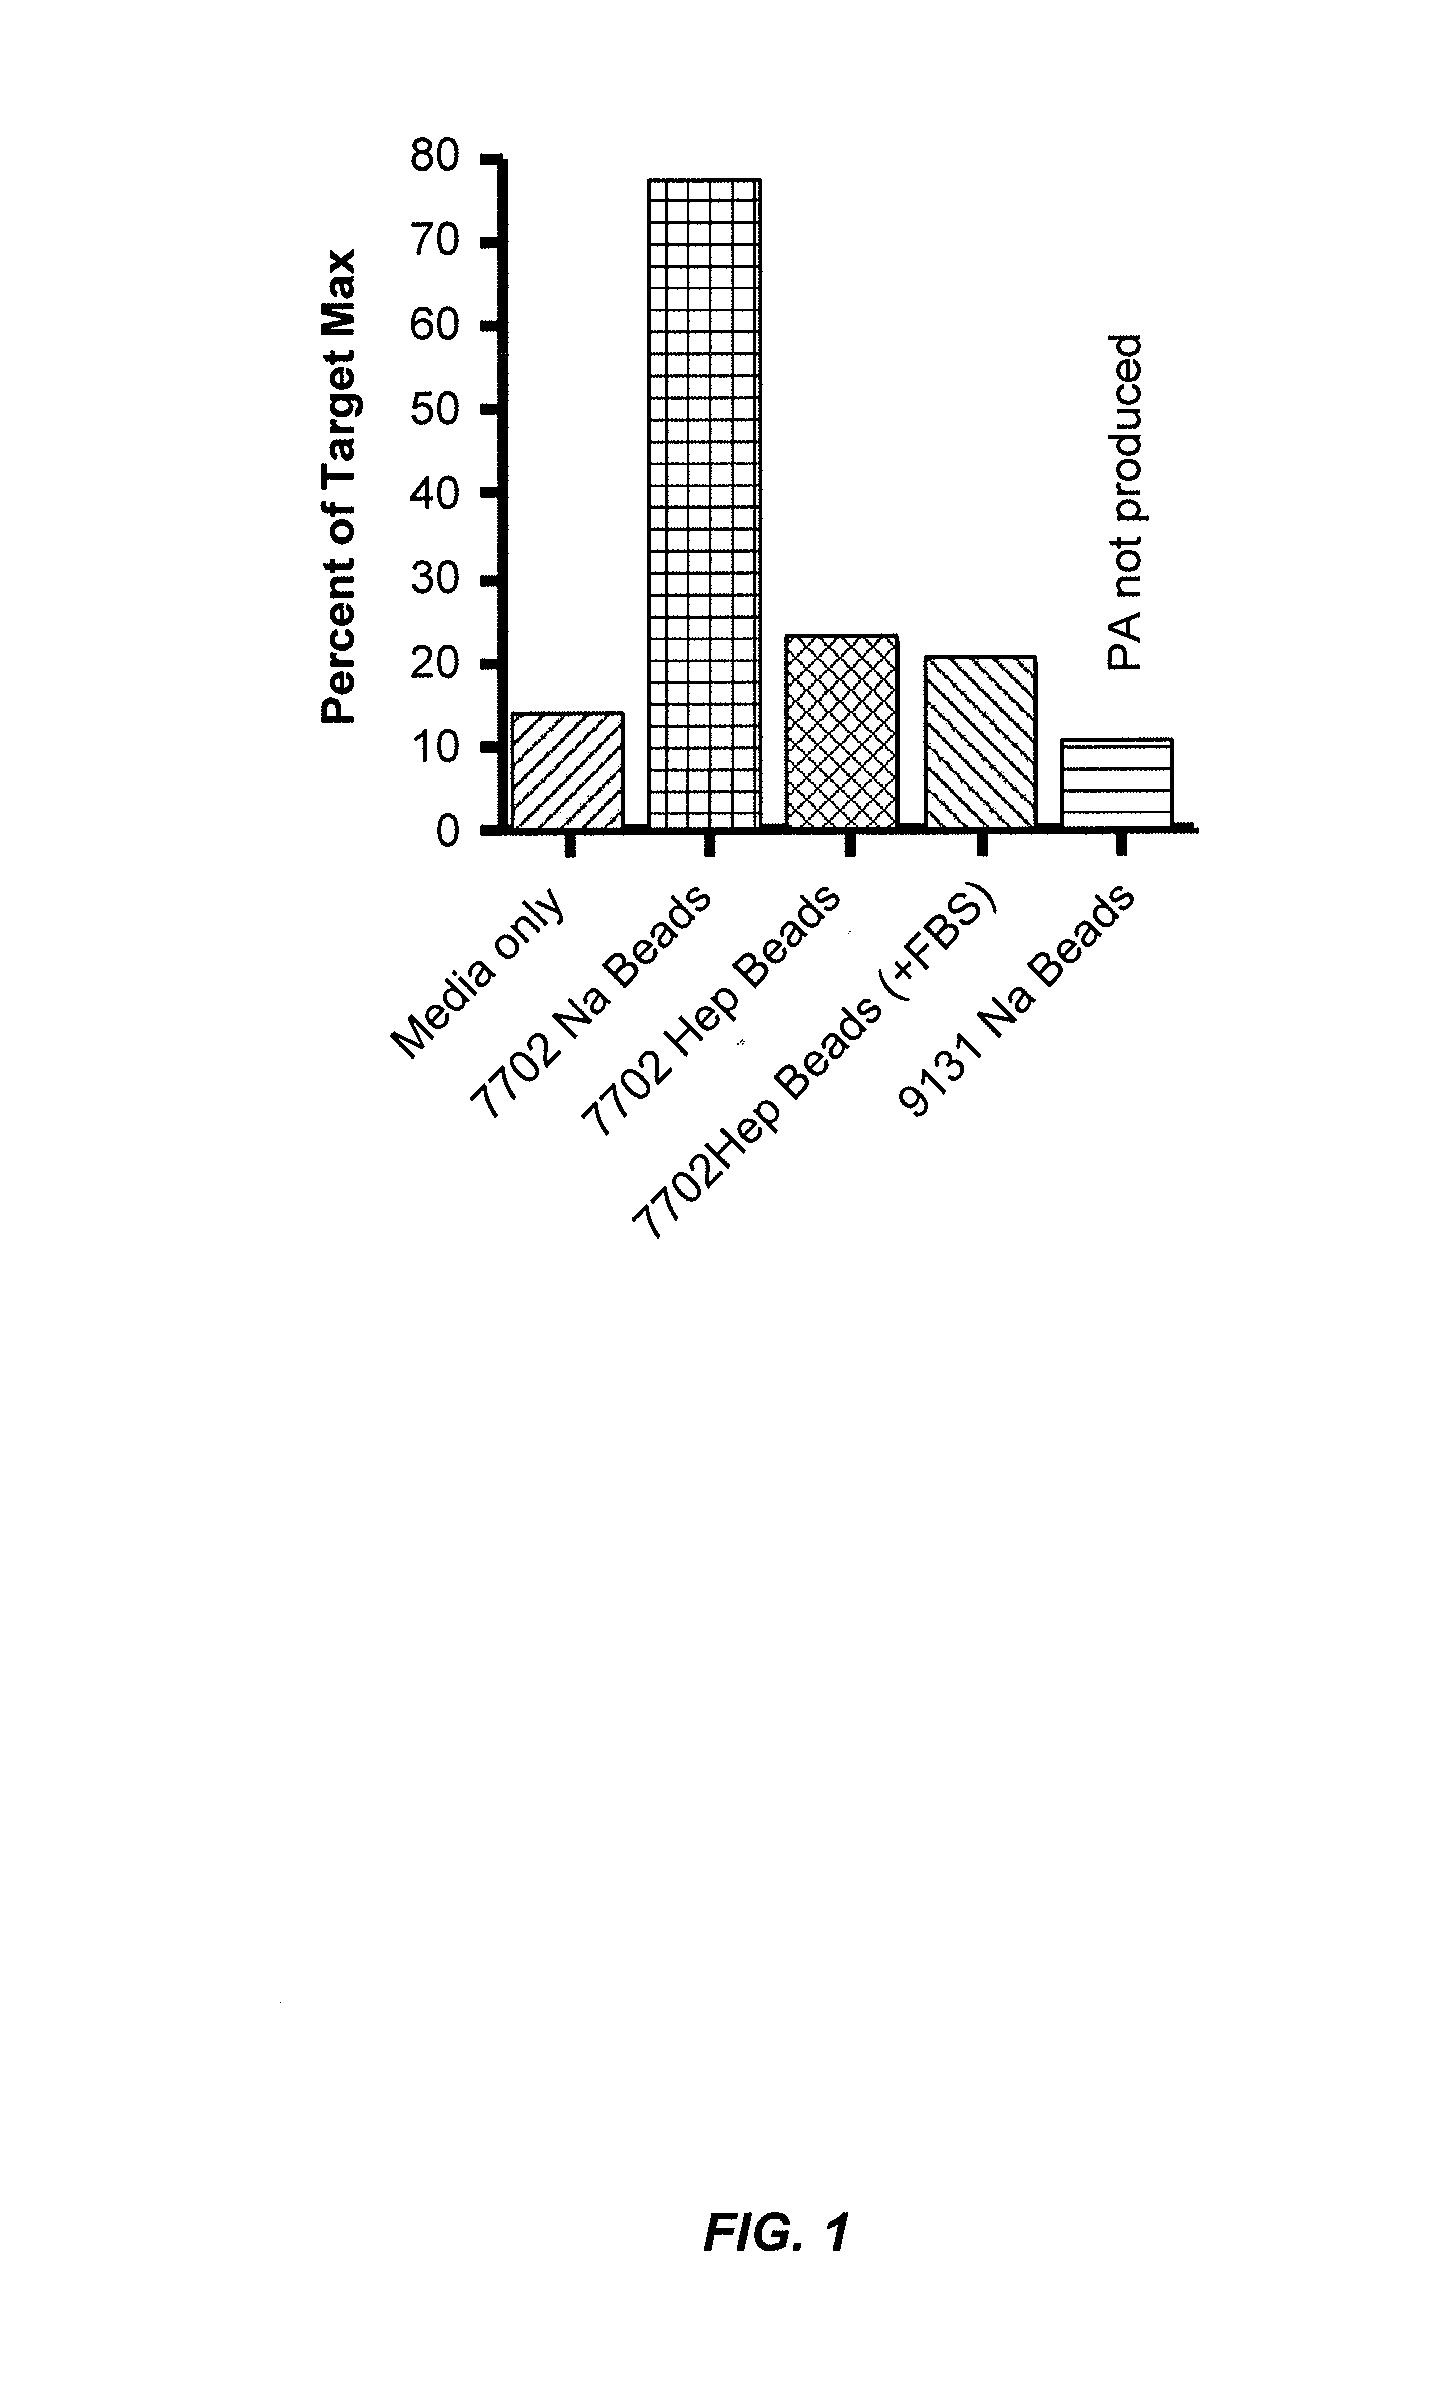 Blood filtration system containing mannose coated substrate